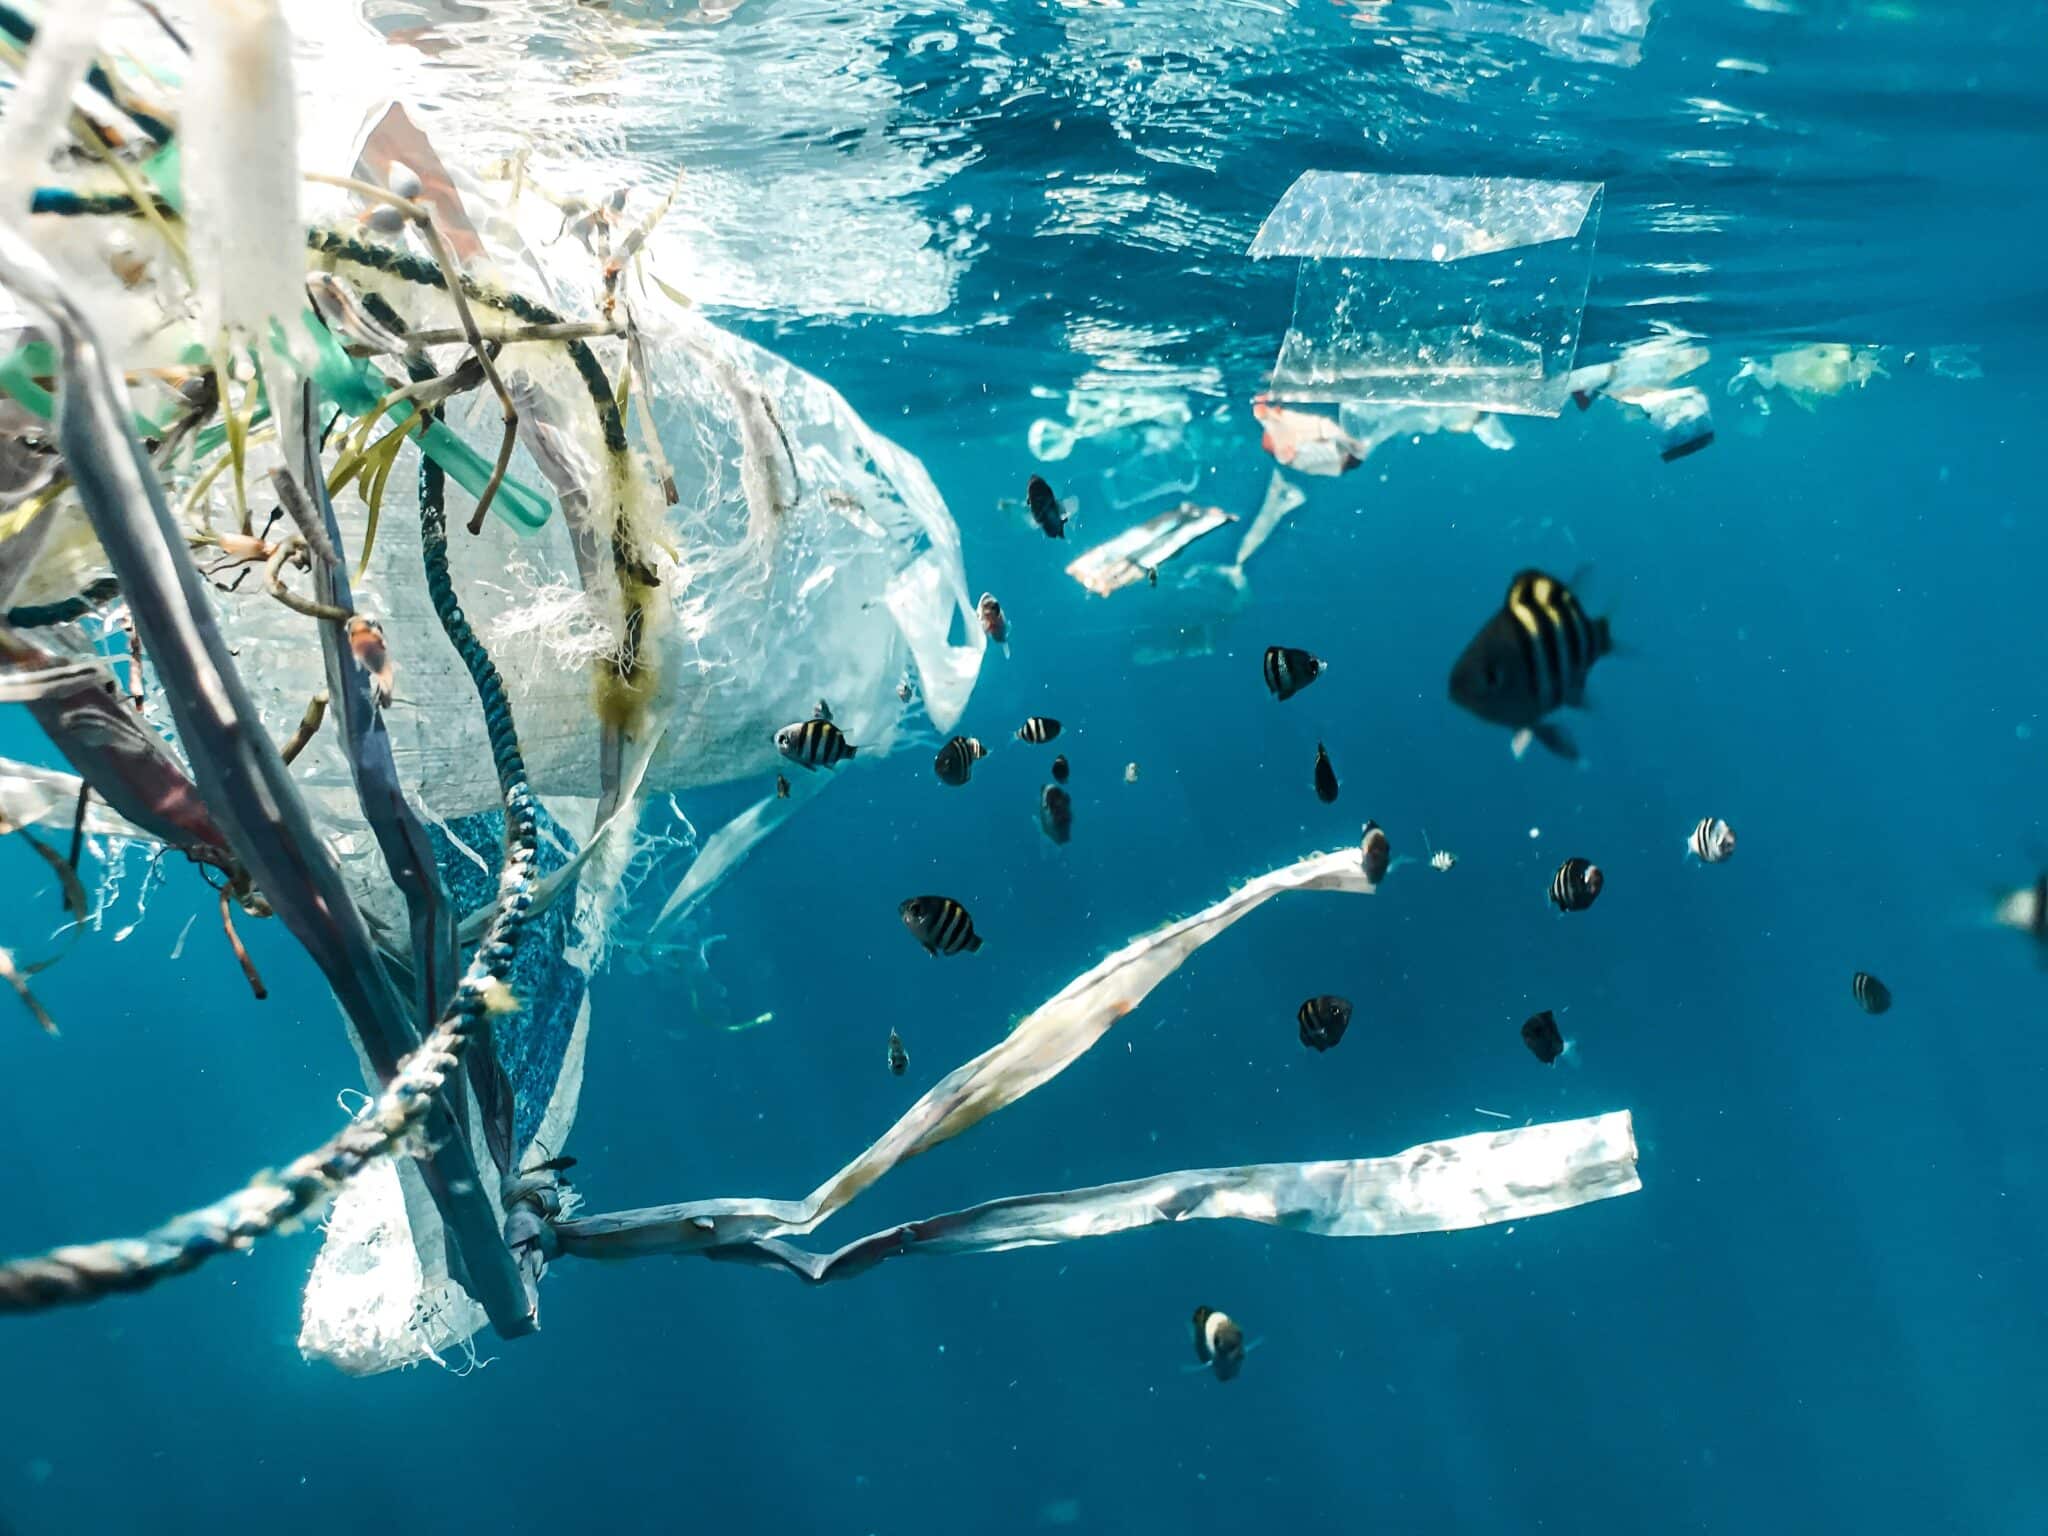 Image os a fish swimming among ocean plastic pollution